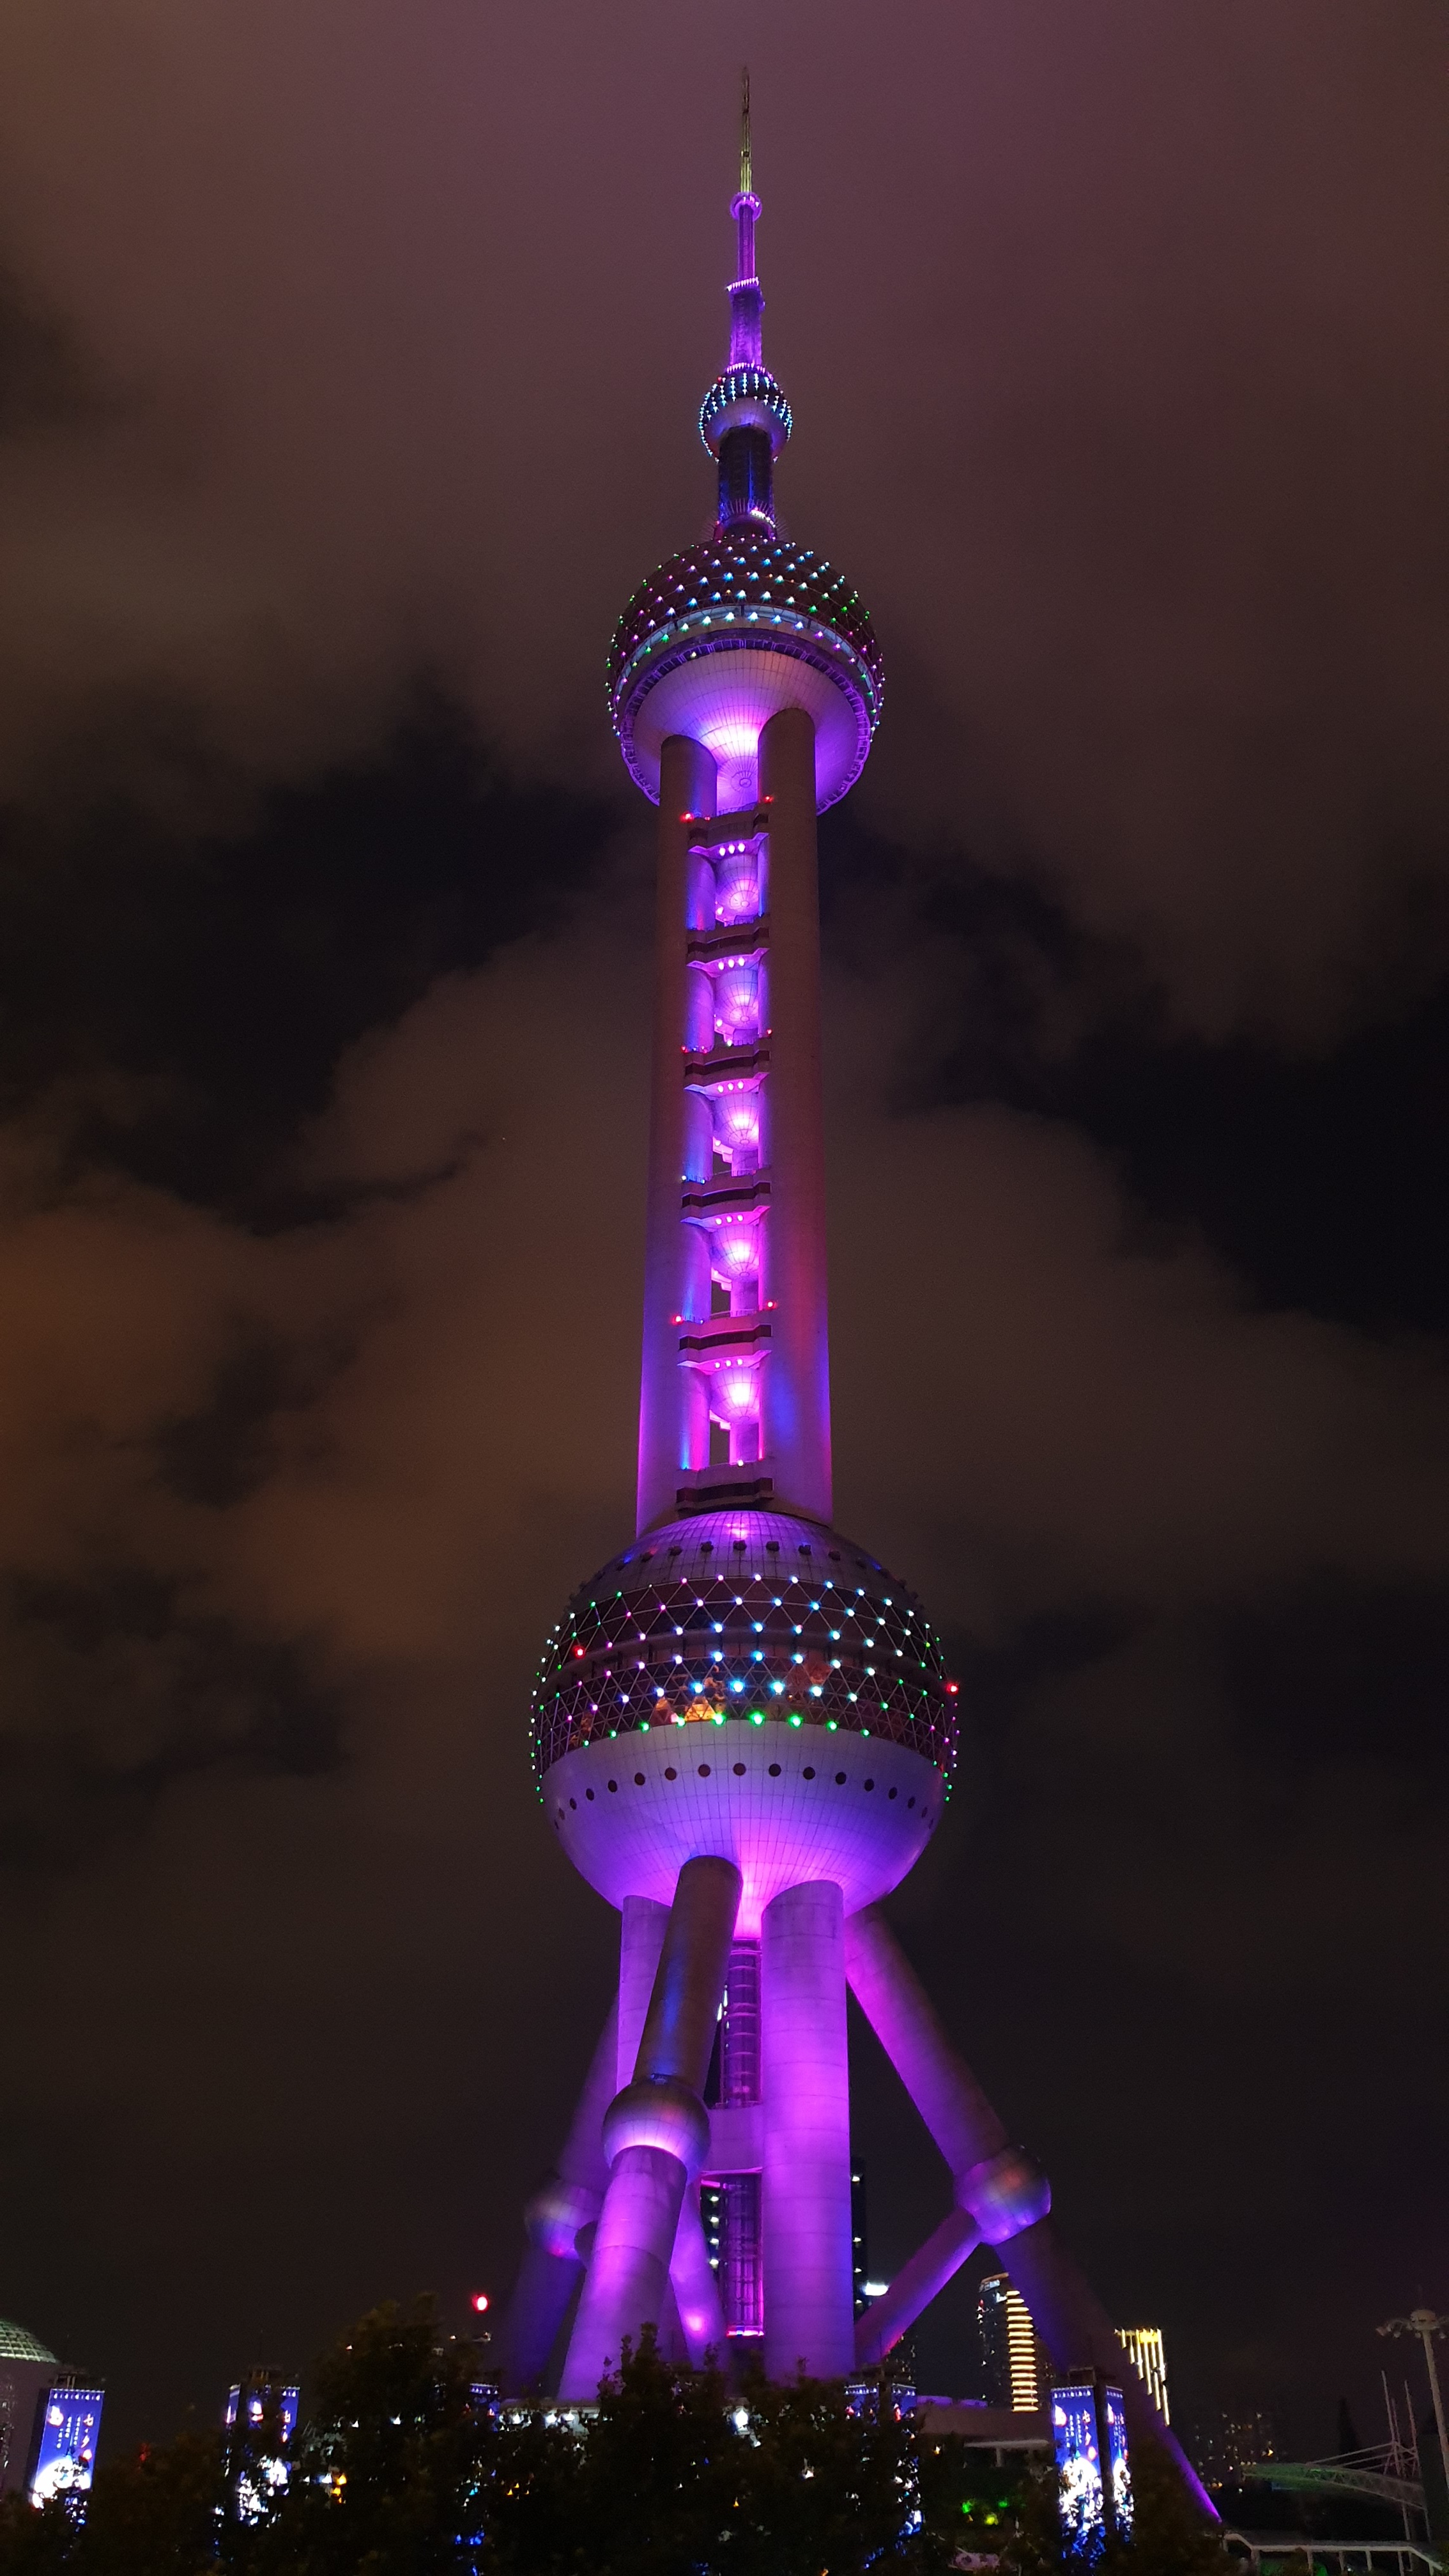 backlight, building, violet, purple, cities, architecture, illumination, tower wallpaper for mobile